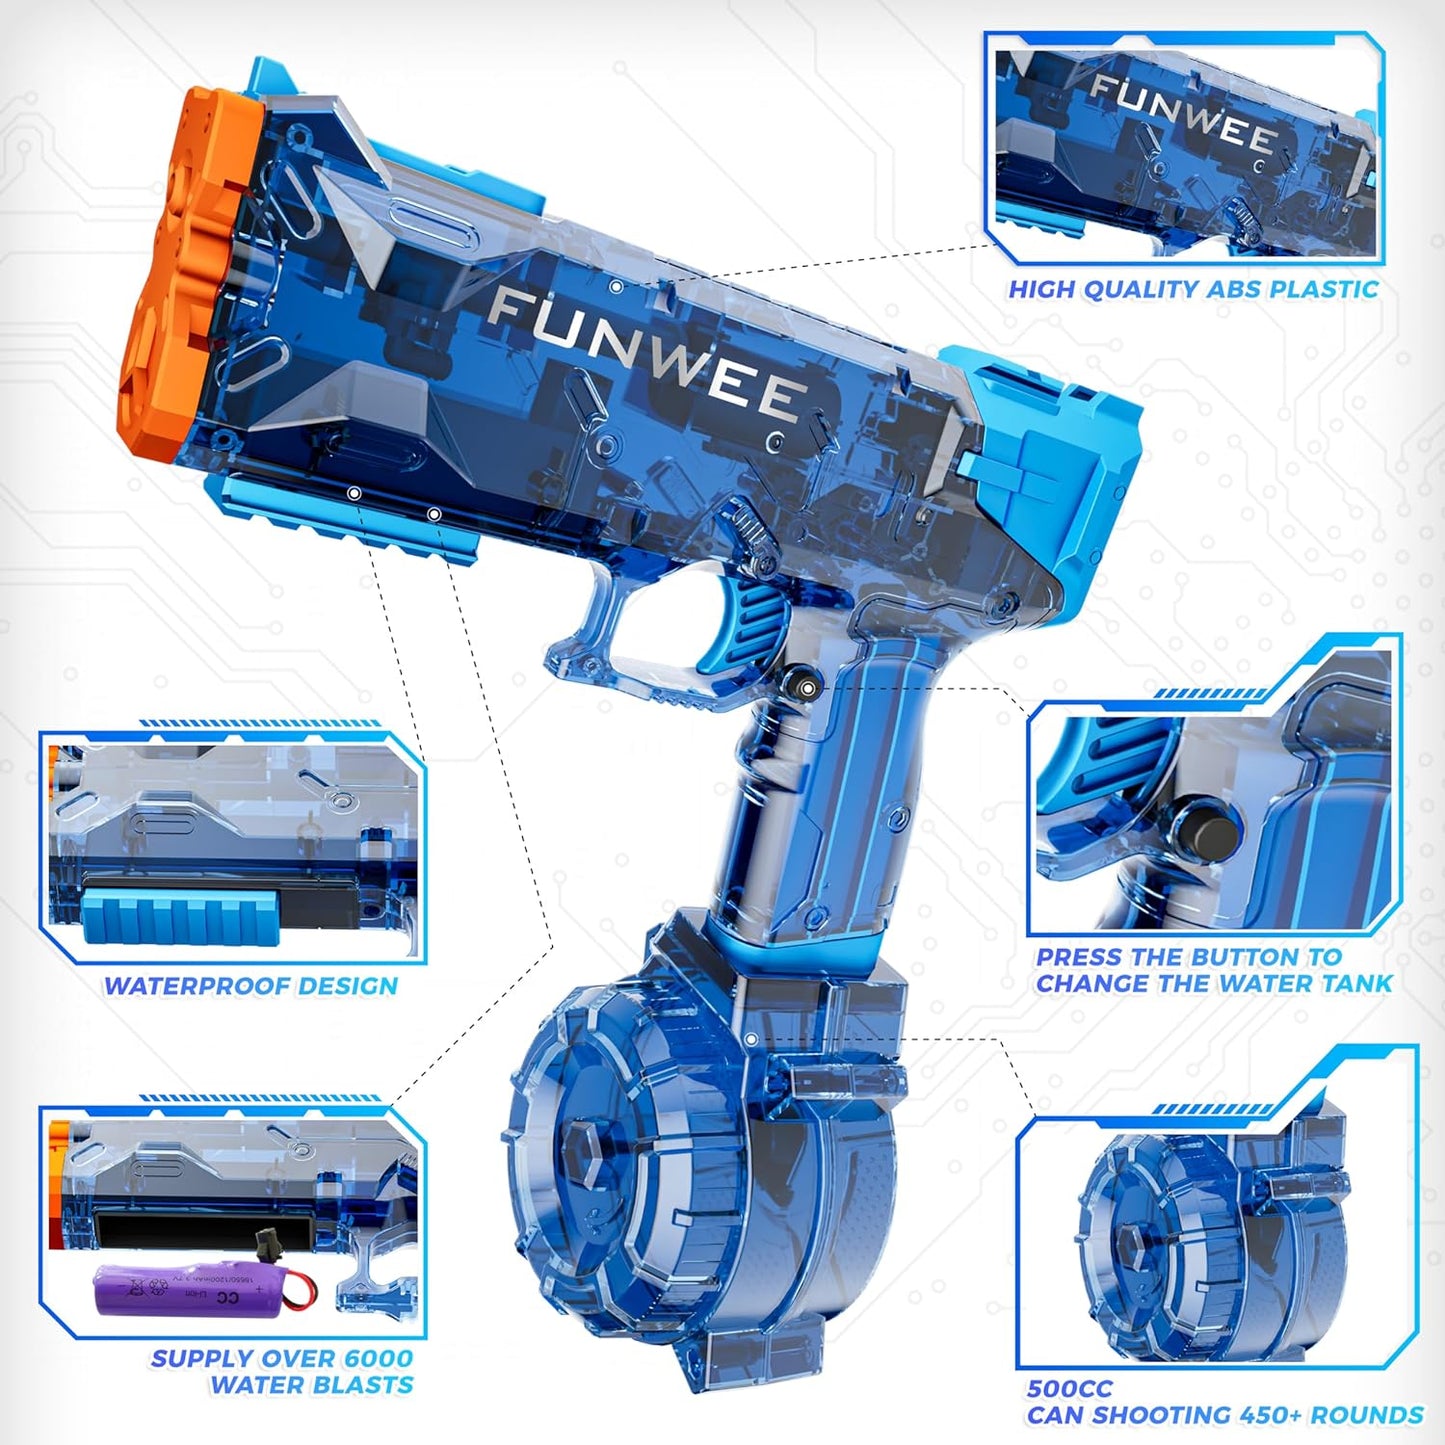 Funwee 2 PACK Electric Water Pistol (Blue+Red)